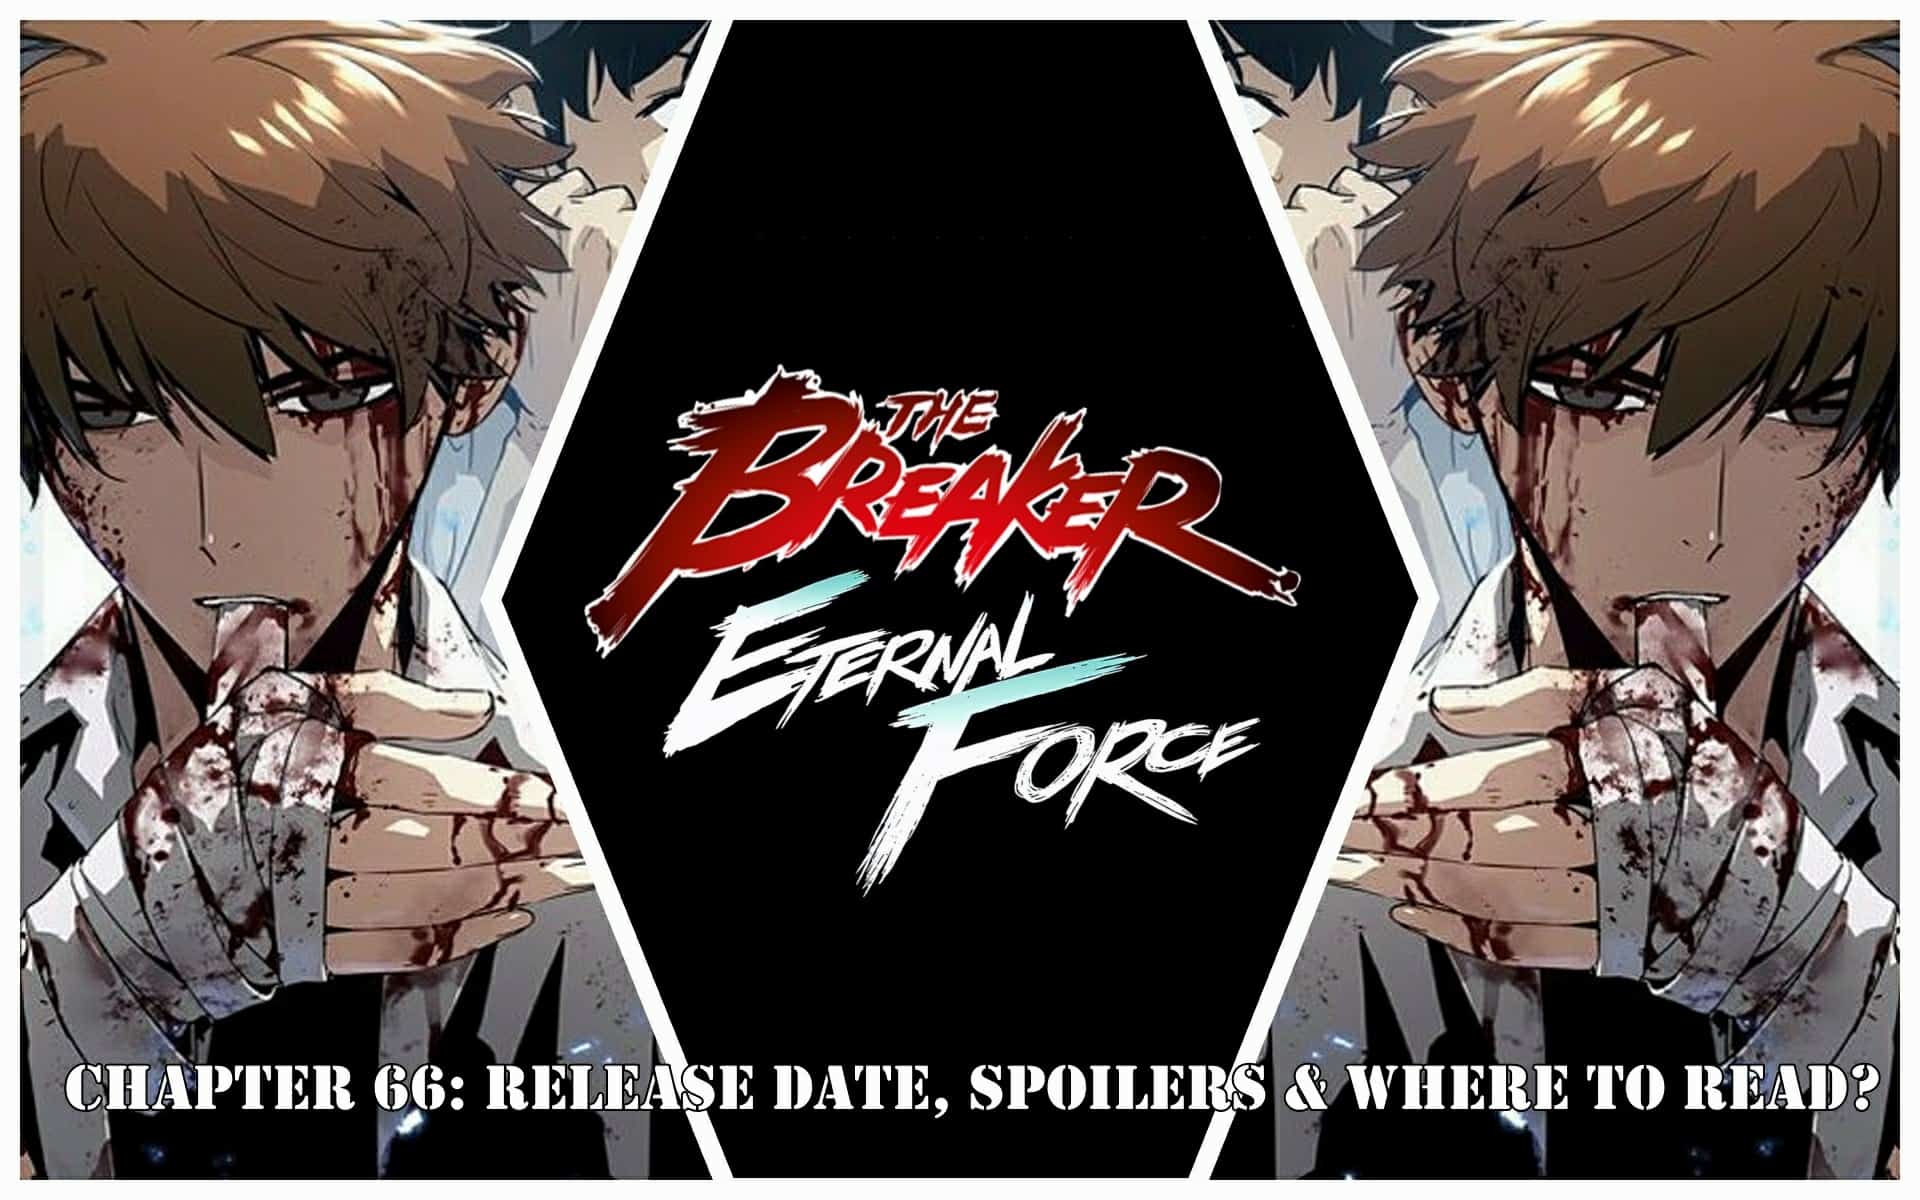 The Breaker: Eternal Force Chapter 66: Release Date, Spoilers & Where to Read?